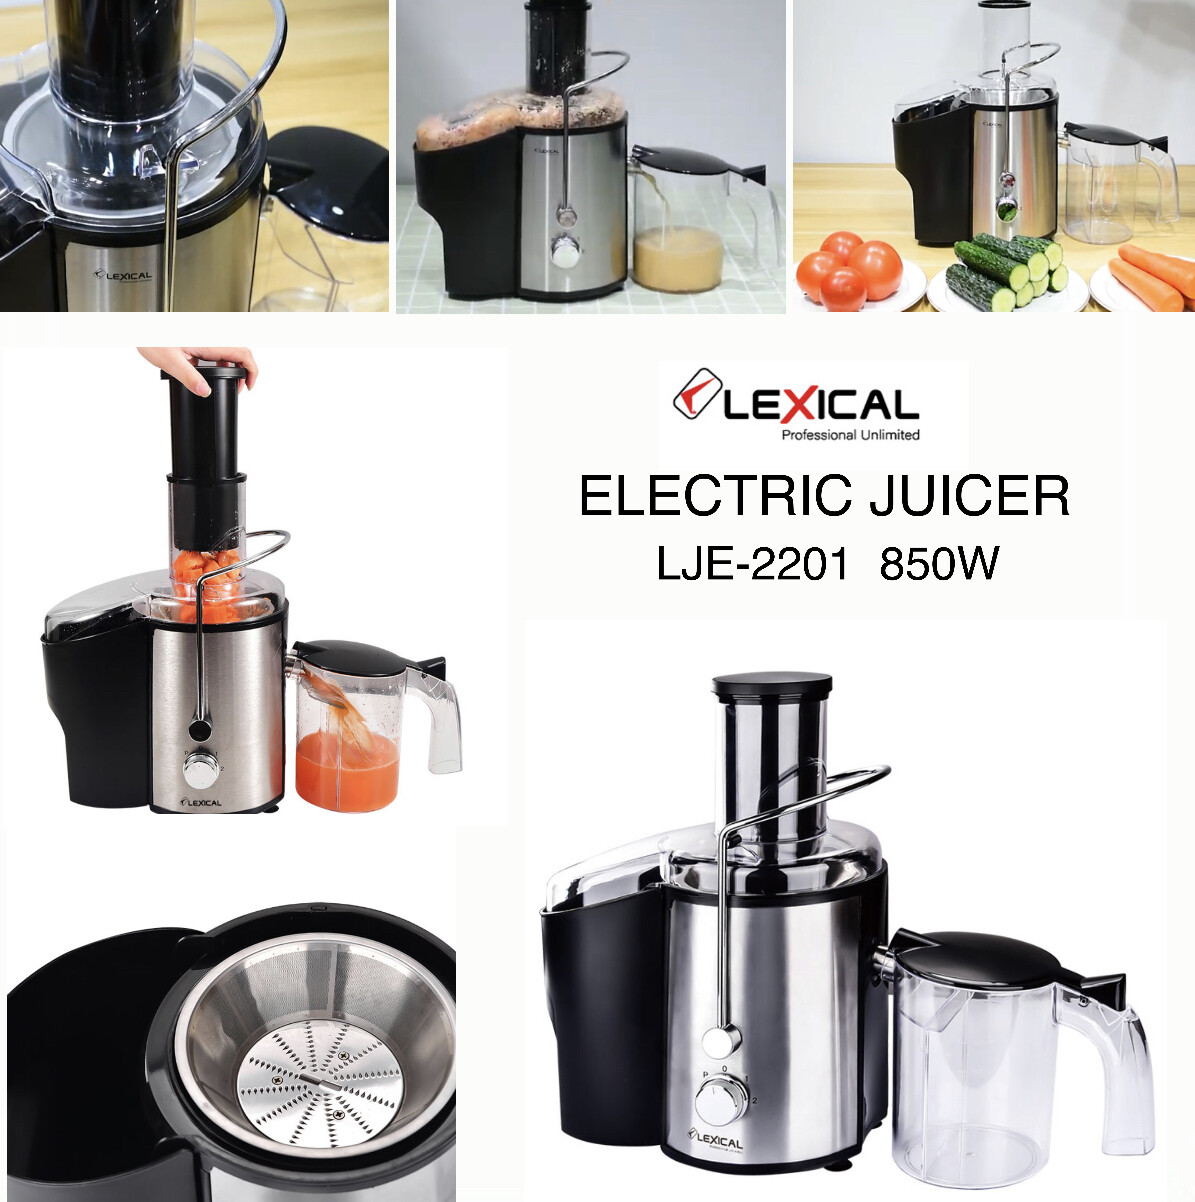 LEXICAL Juice Extractor